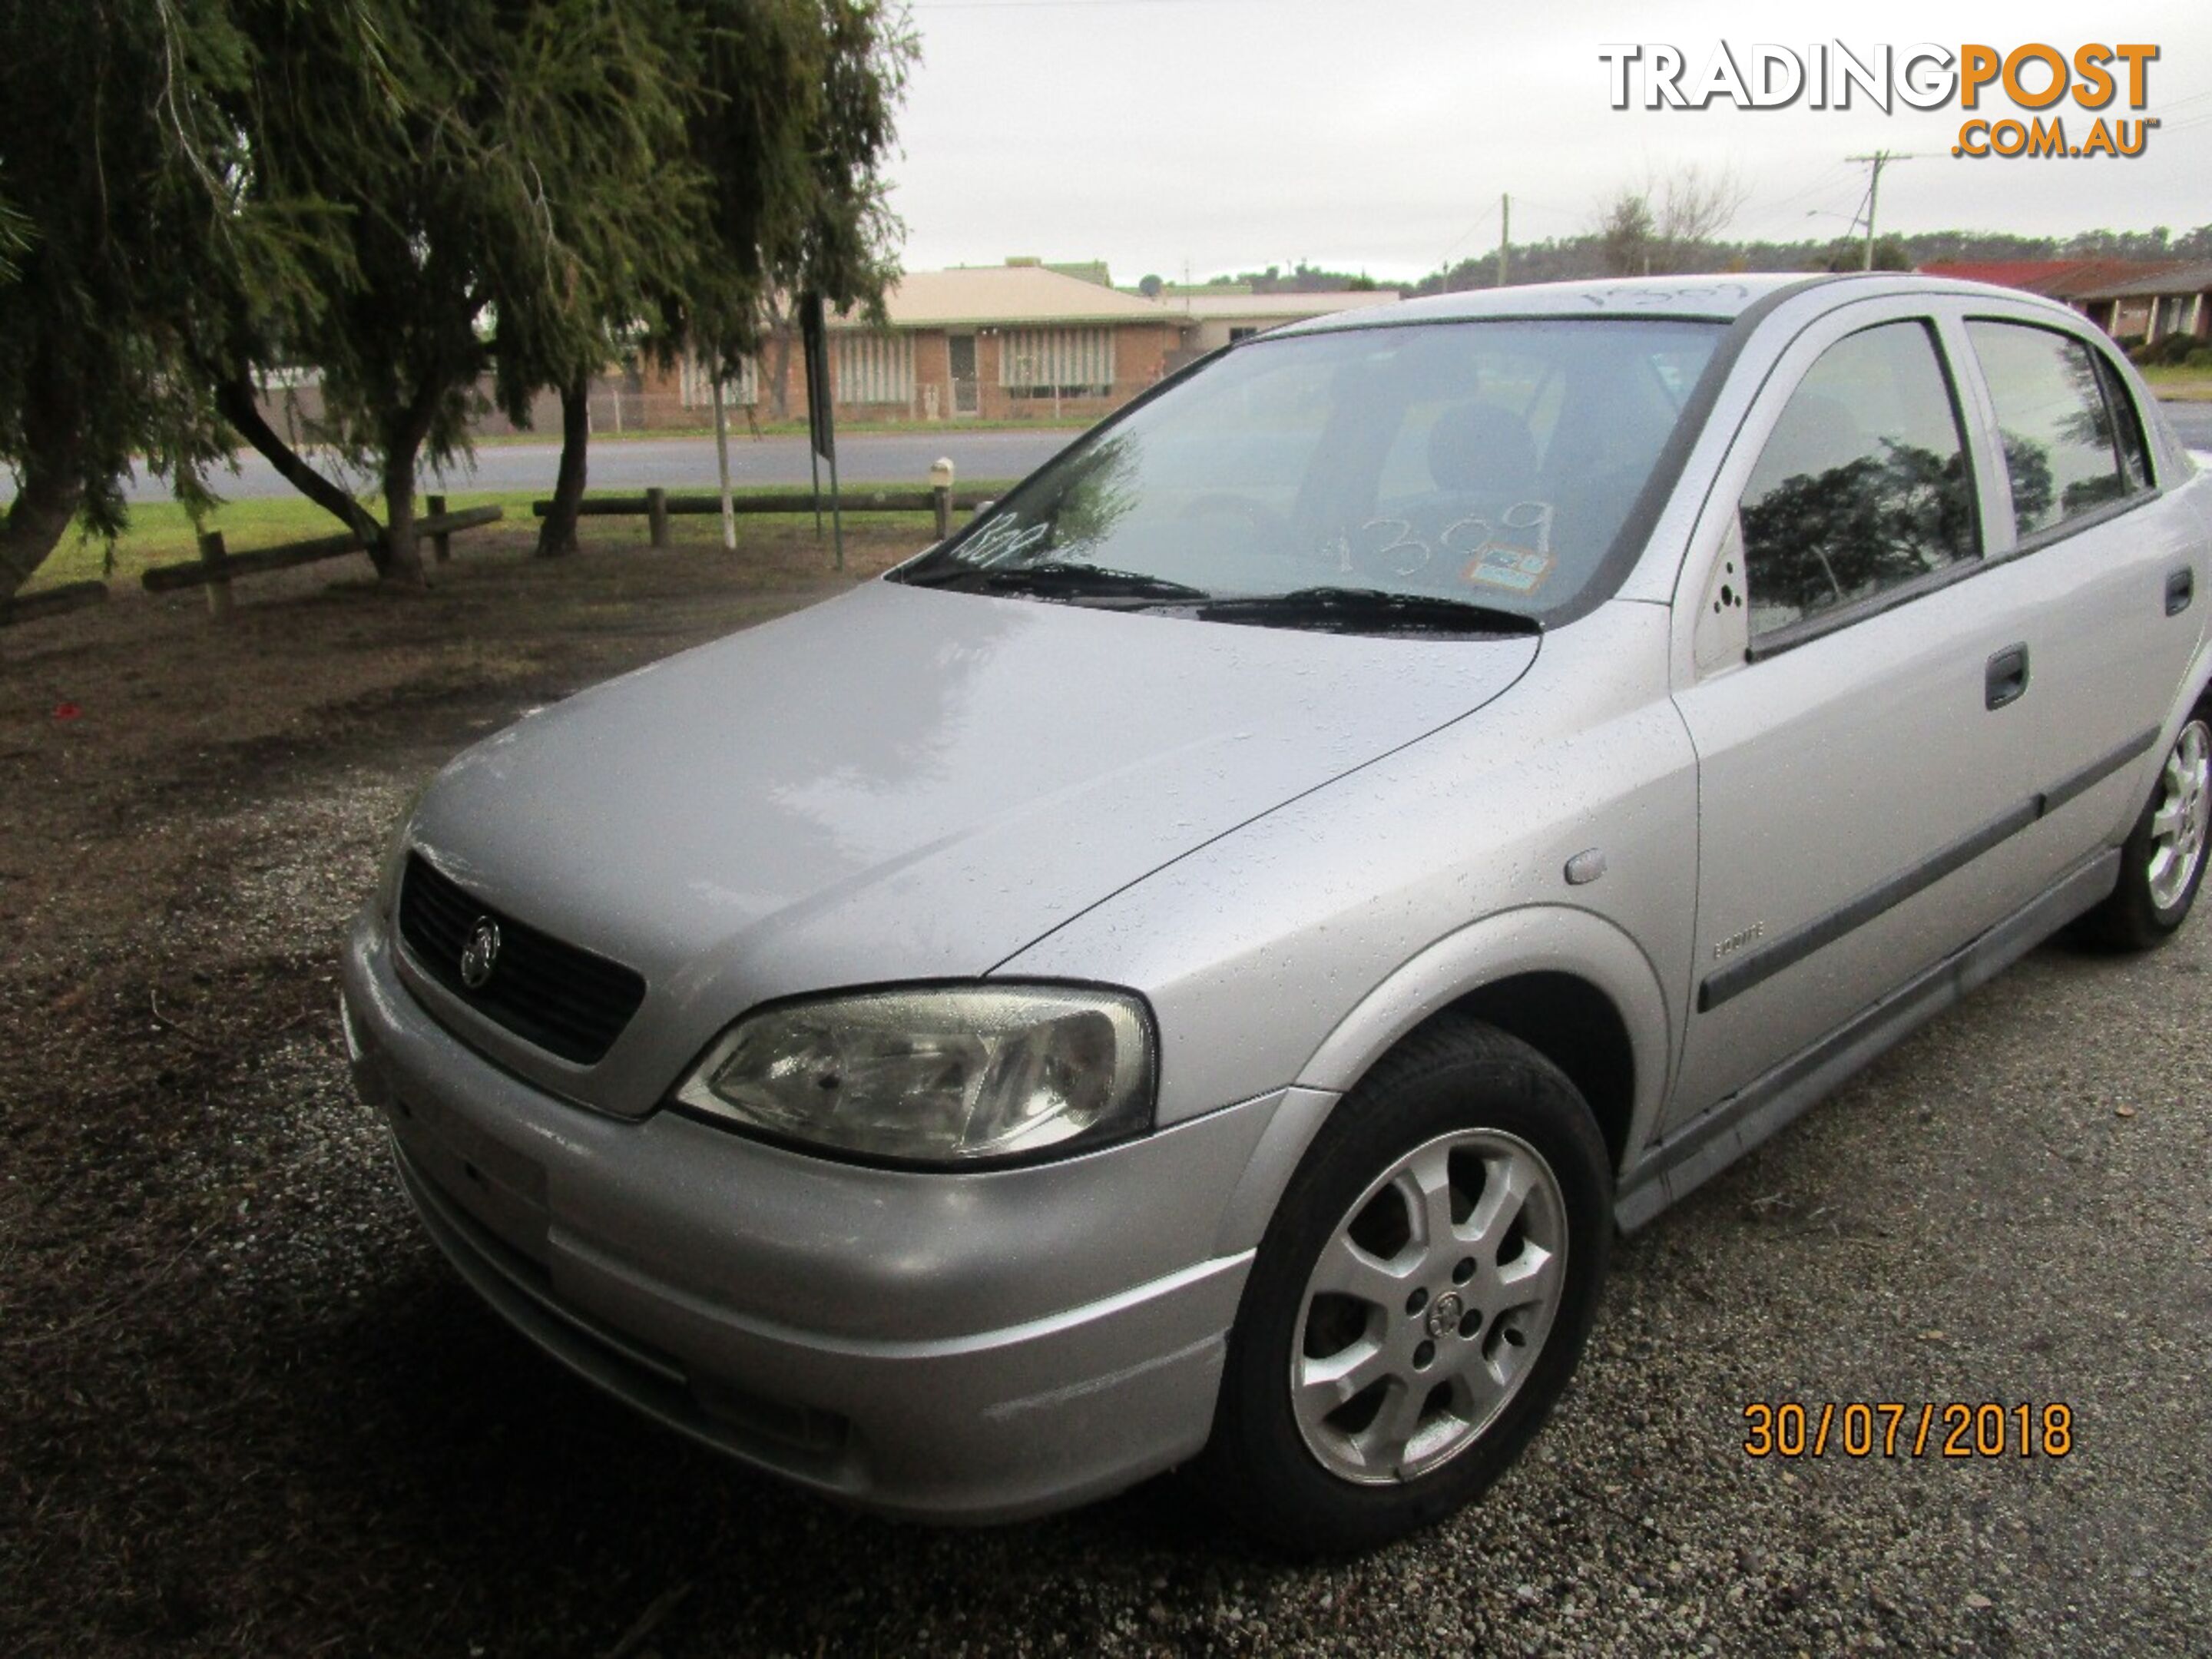 Holden Astra TS Silver 2/2002 (WRECKING)